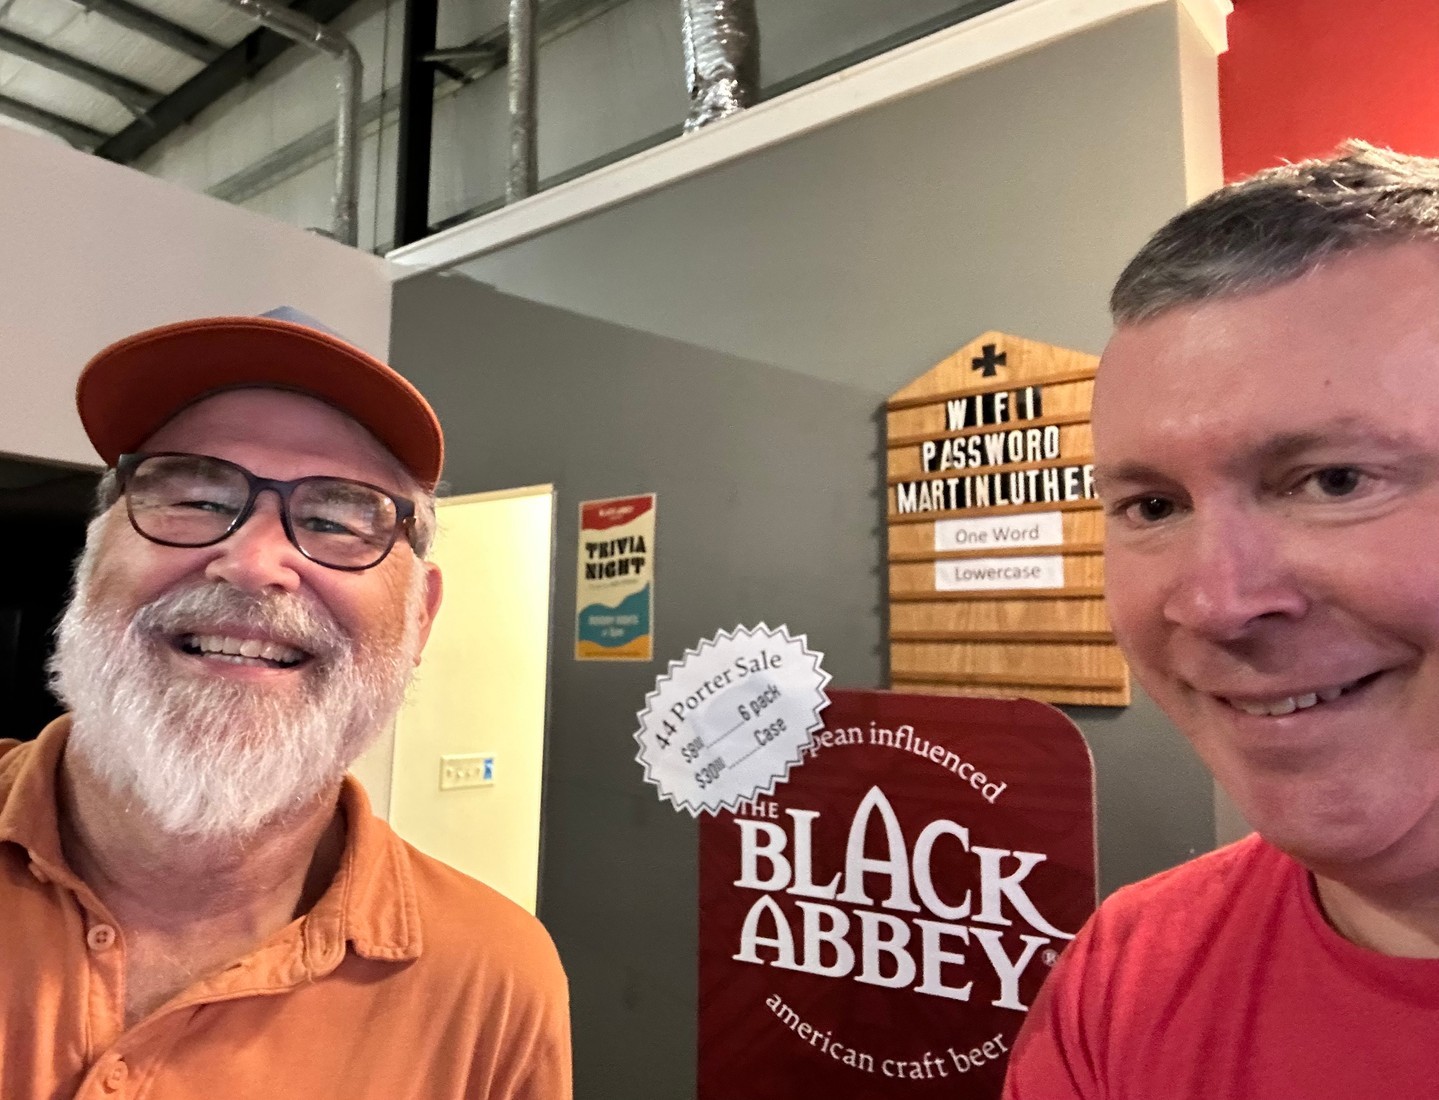 Getting to meet our customers is alway a great joy to us. It was so nice to see Carl at Black Abbey Brewing Company. Thank you Black Abbey Brewery for being and amazing customer.
 #amazingcustomer #meetourcustomers #customers #brewery #greatjoy